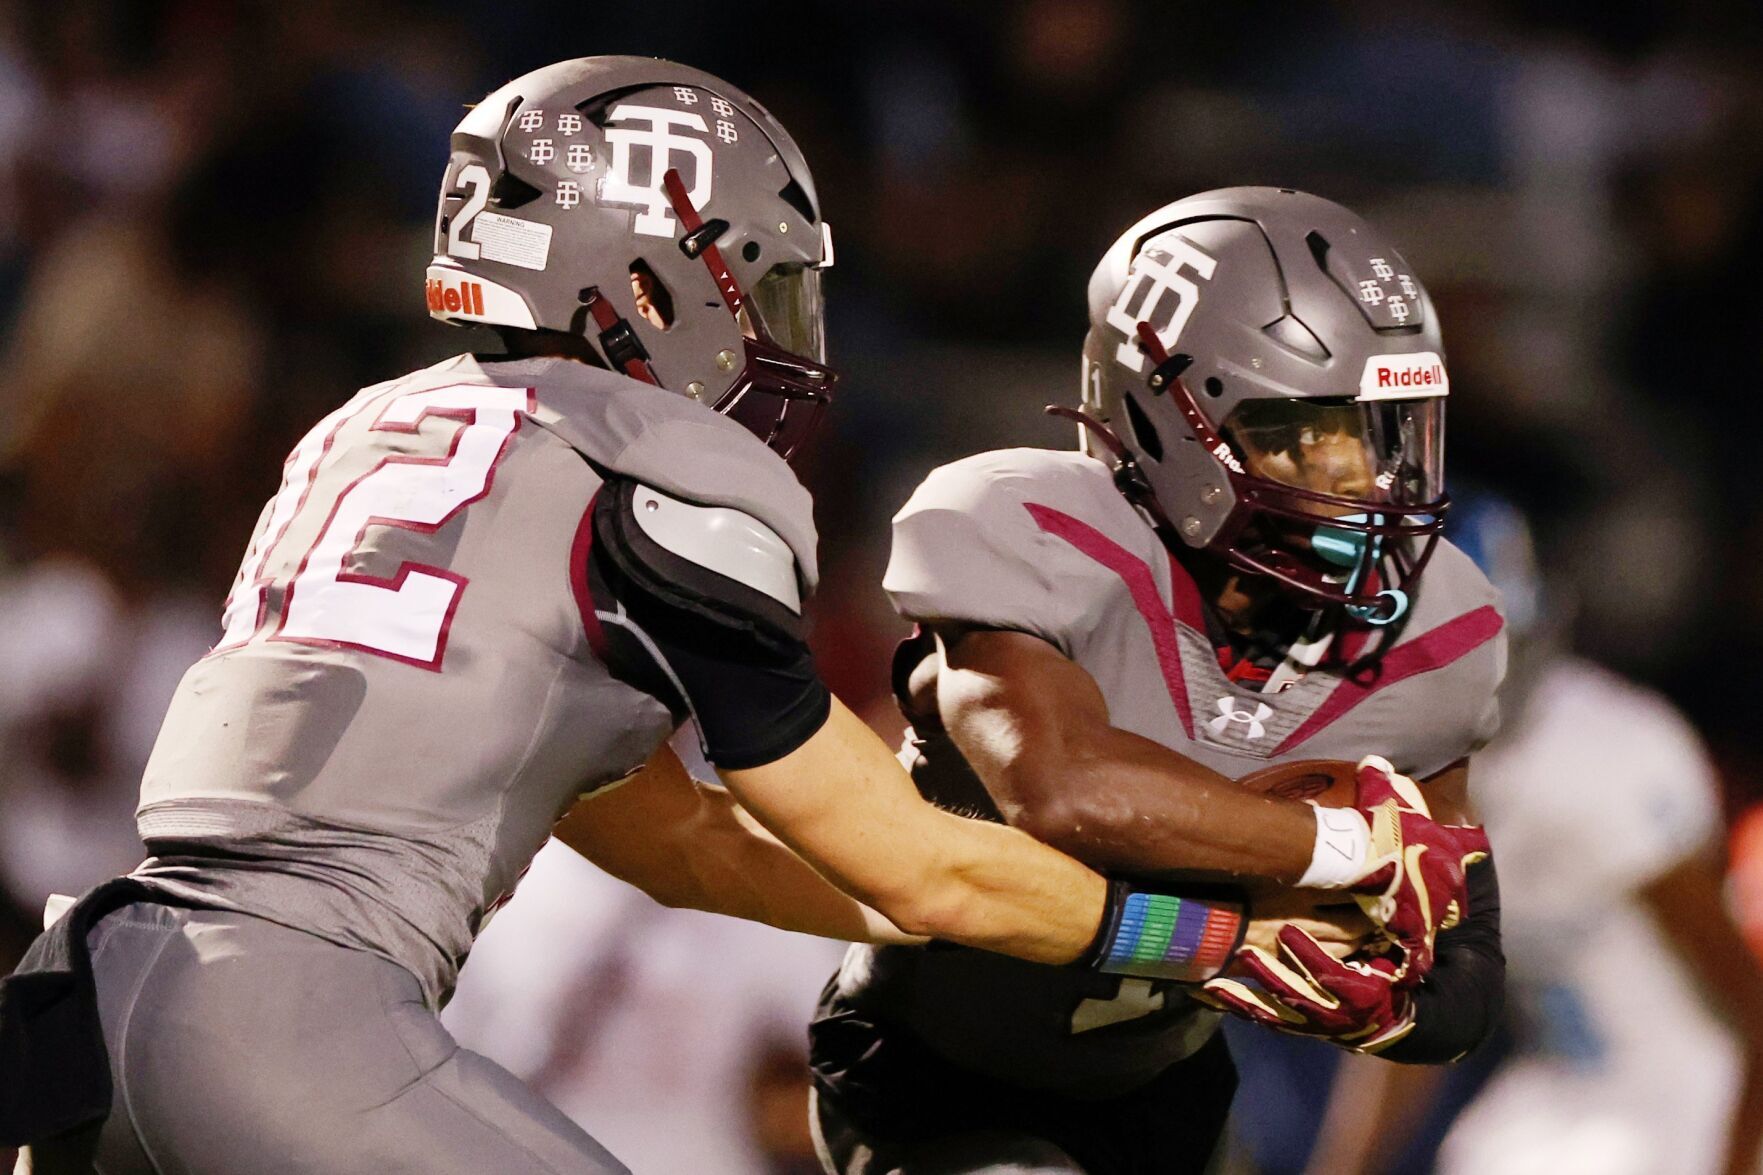 Thomas Dale dominates Glen Allen in 27-7 victory but coach emphasizes room for improvement